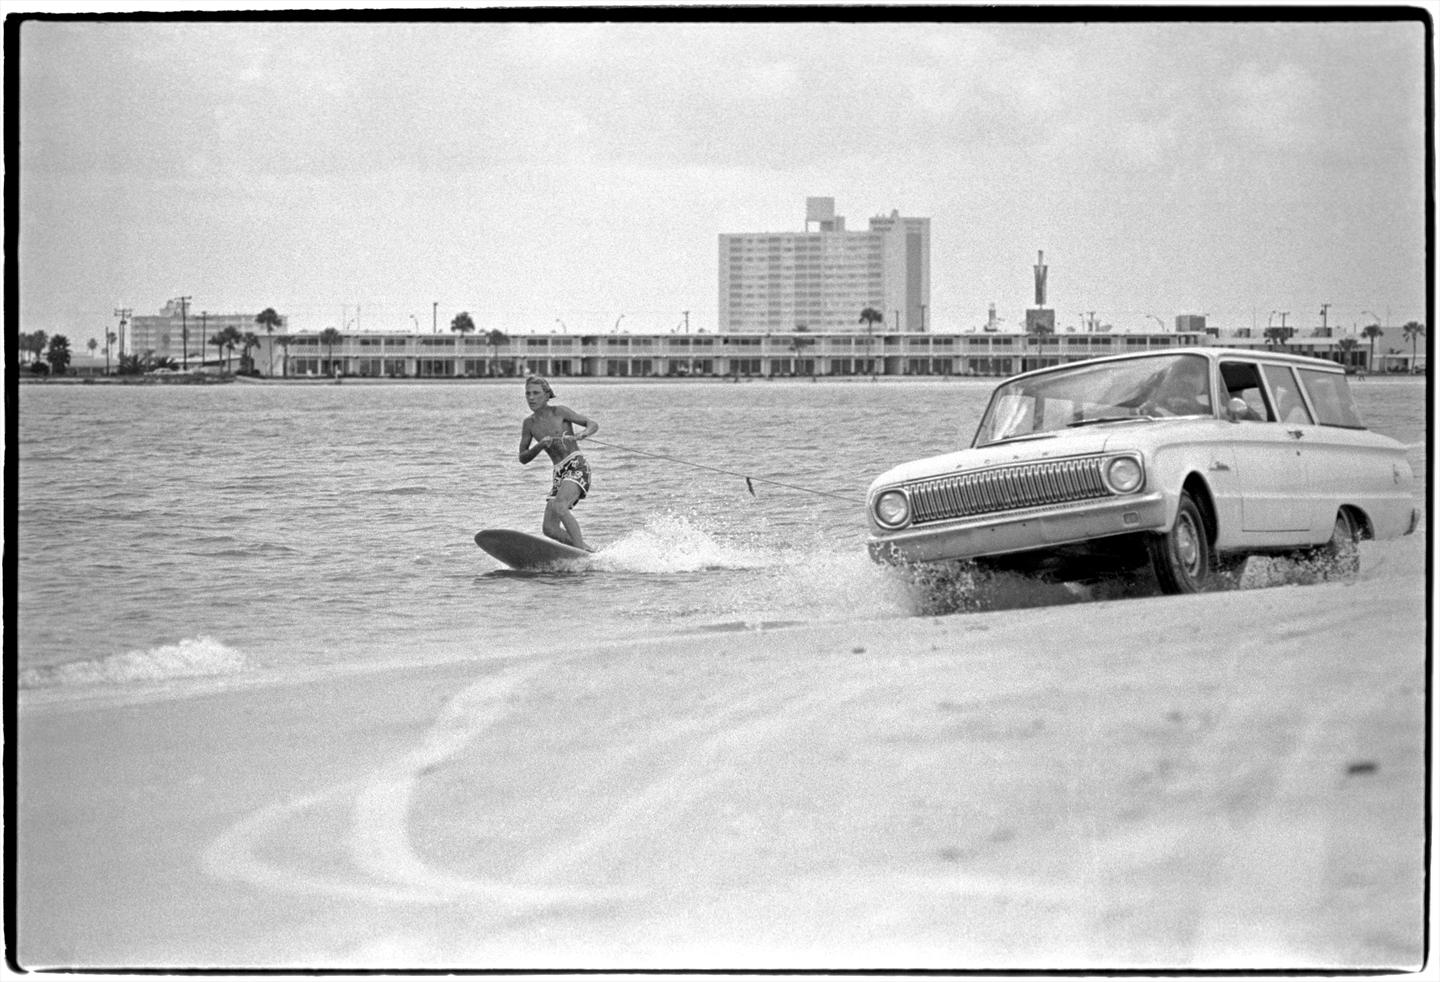 Catching a Ride by Al Satterwhite is a 11 x 14 inch archival pigment print, available in an edition of 25. This photograph features a man surfing in the ocean while being pulled by a car driving on the sand.
This photograph is signed with edition